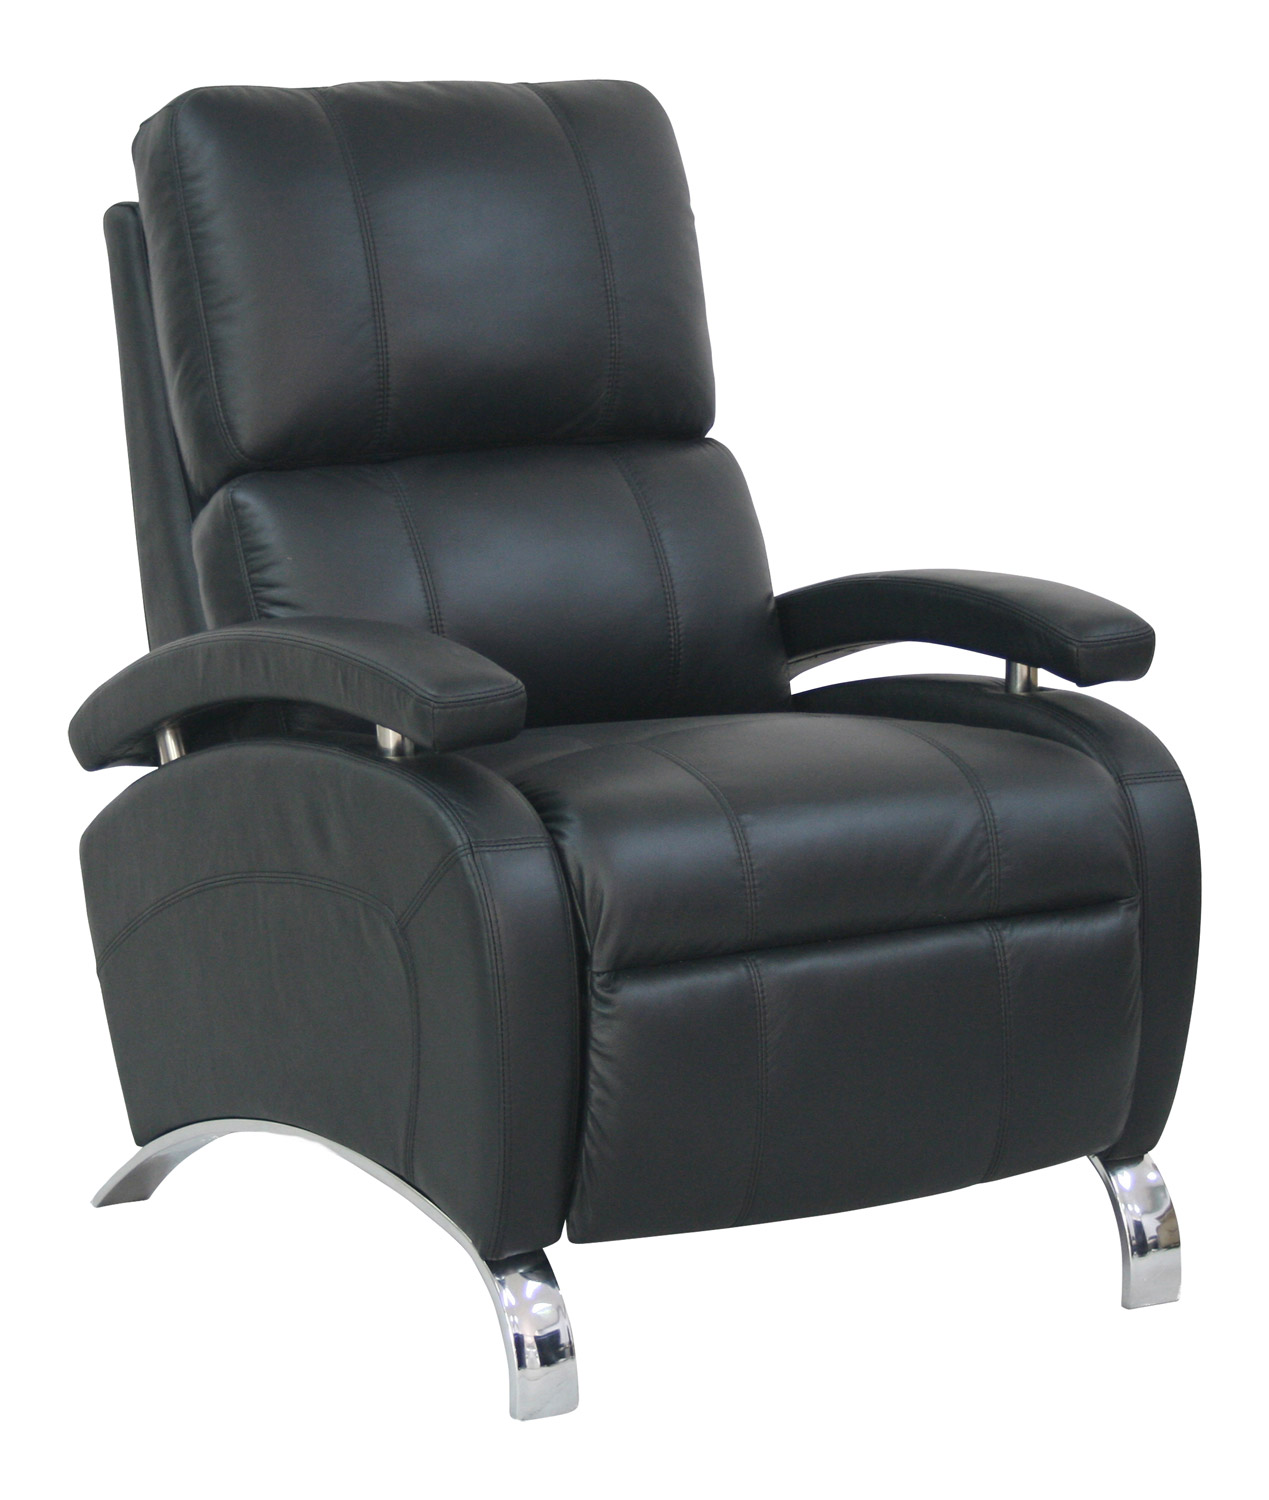 Barcalounger Oracle ll Metro Living Recliner Chair - Black